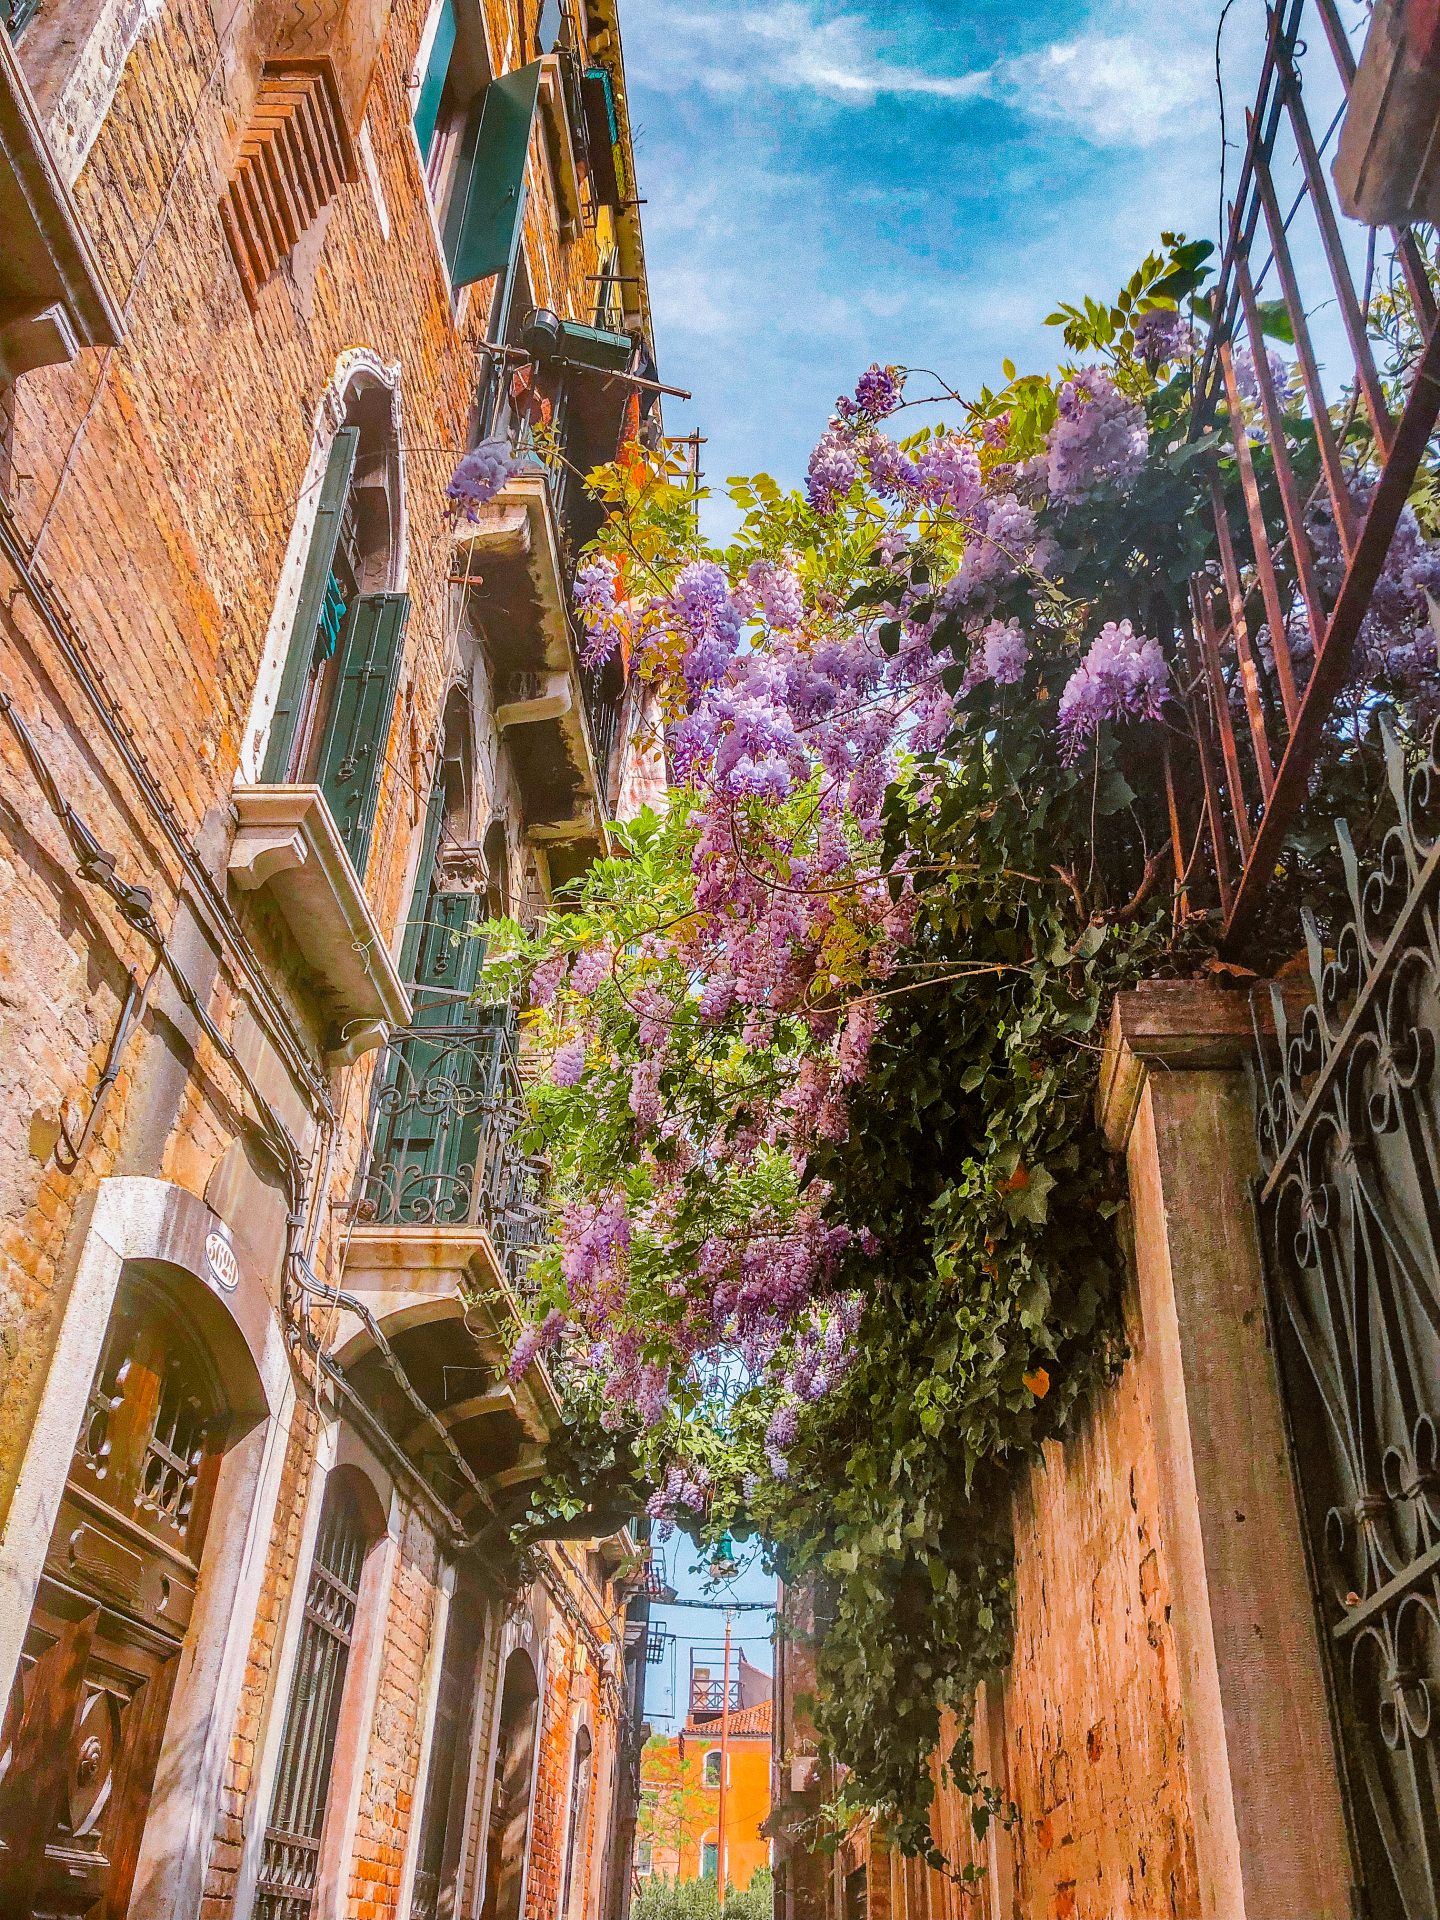 Wisteria flowers blooming and hanging over a walkway in Venice, Italy